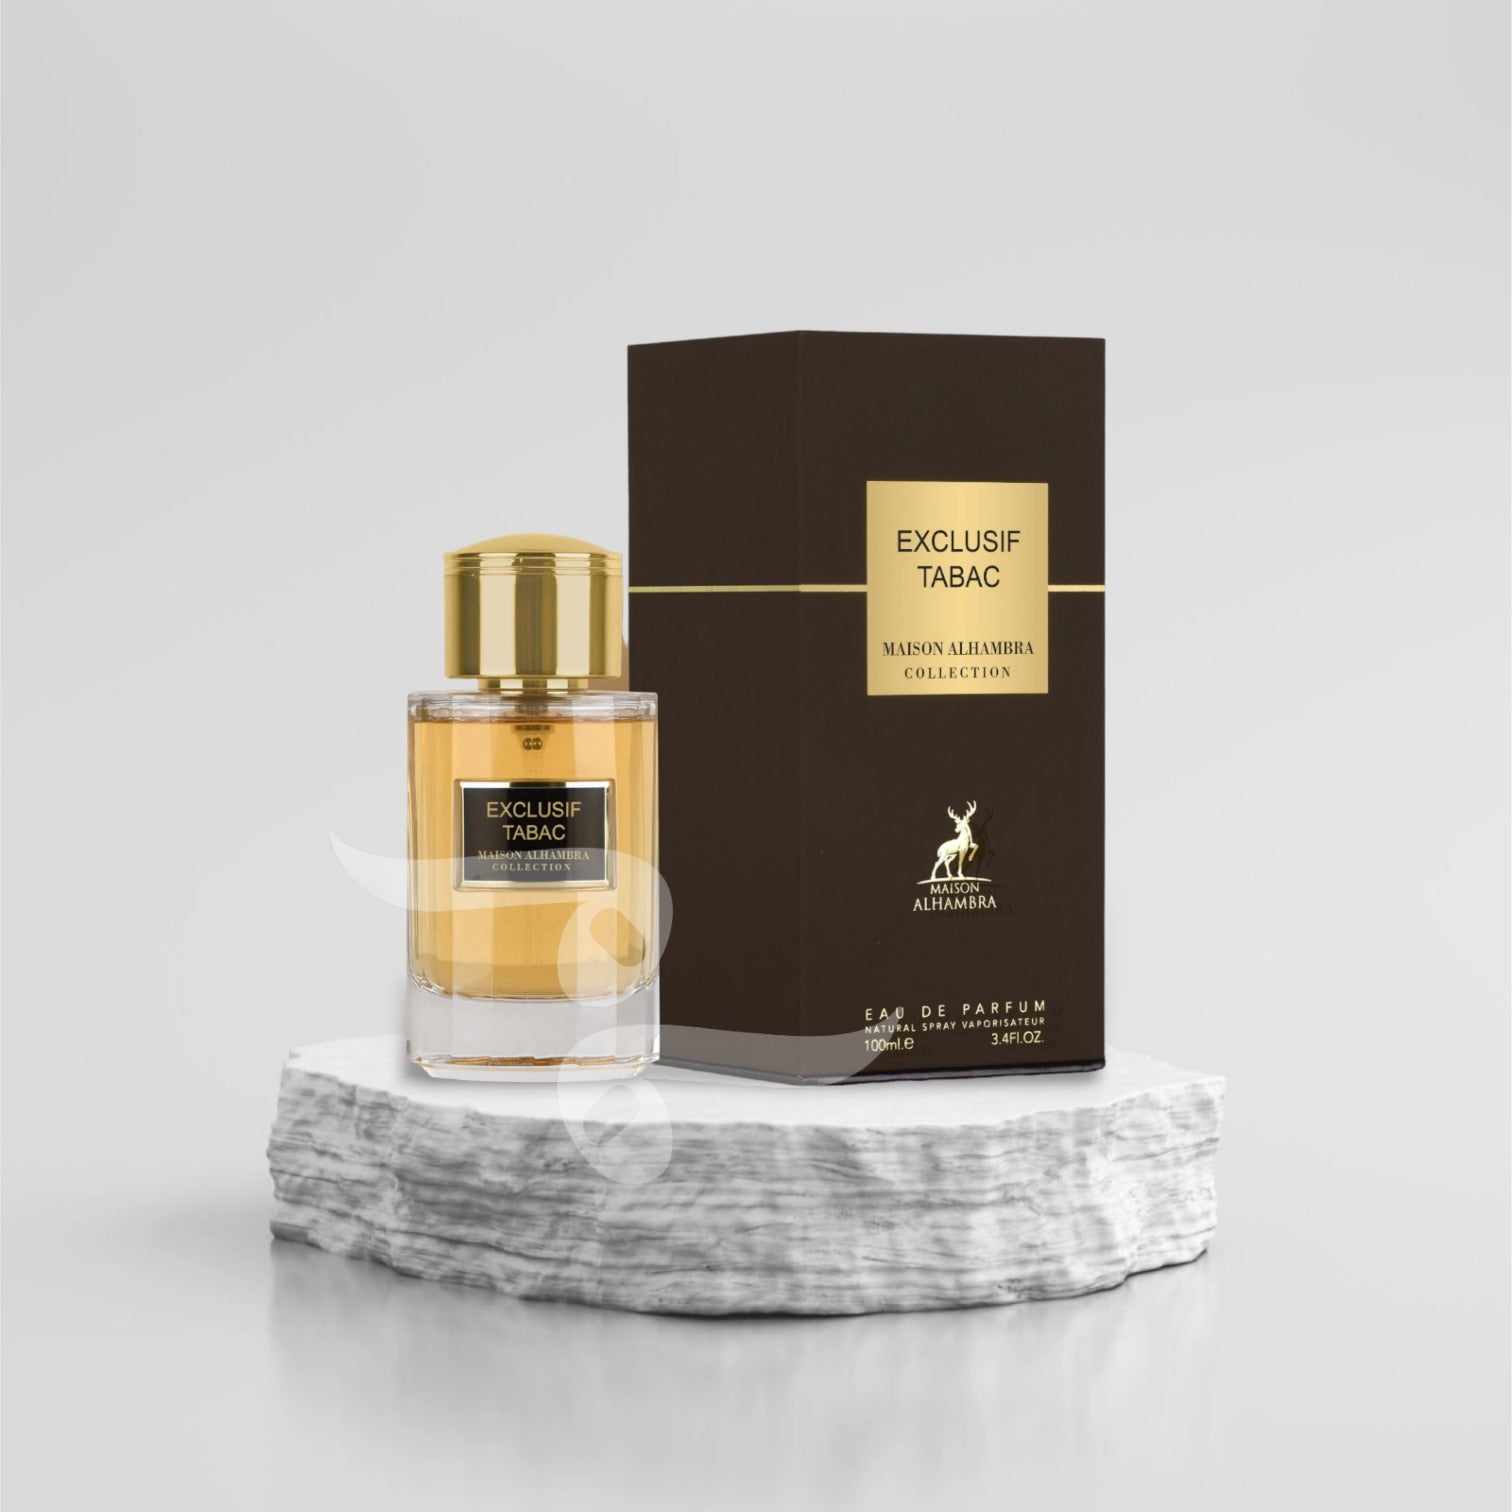 Exclusif Tabac 100 Ml - Exclusif Coll